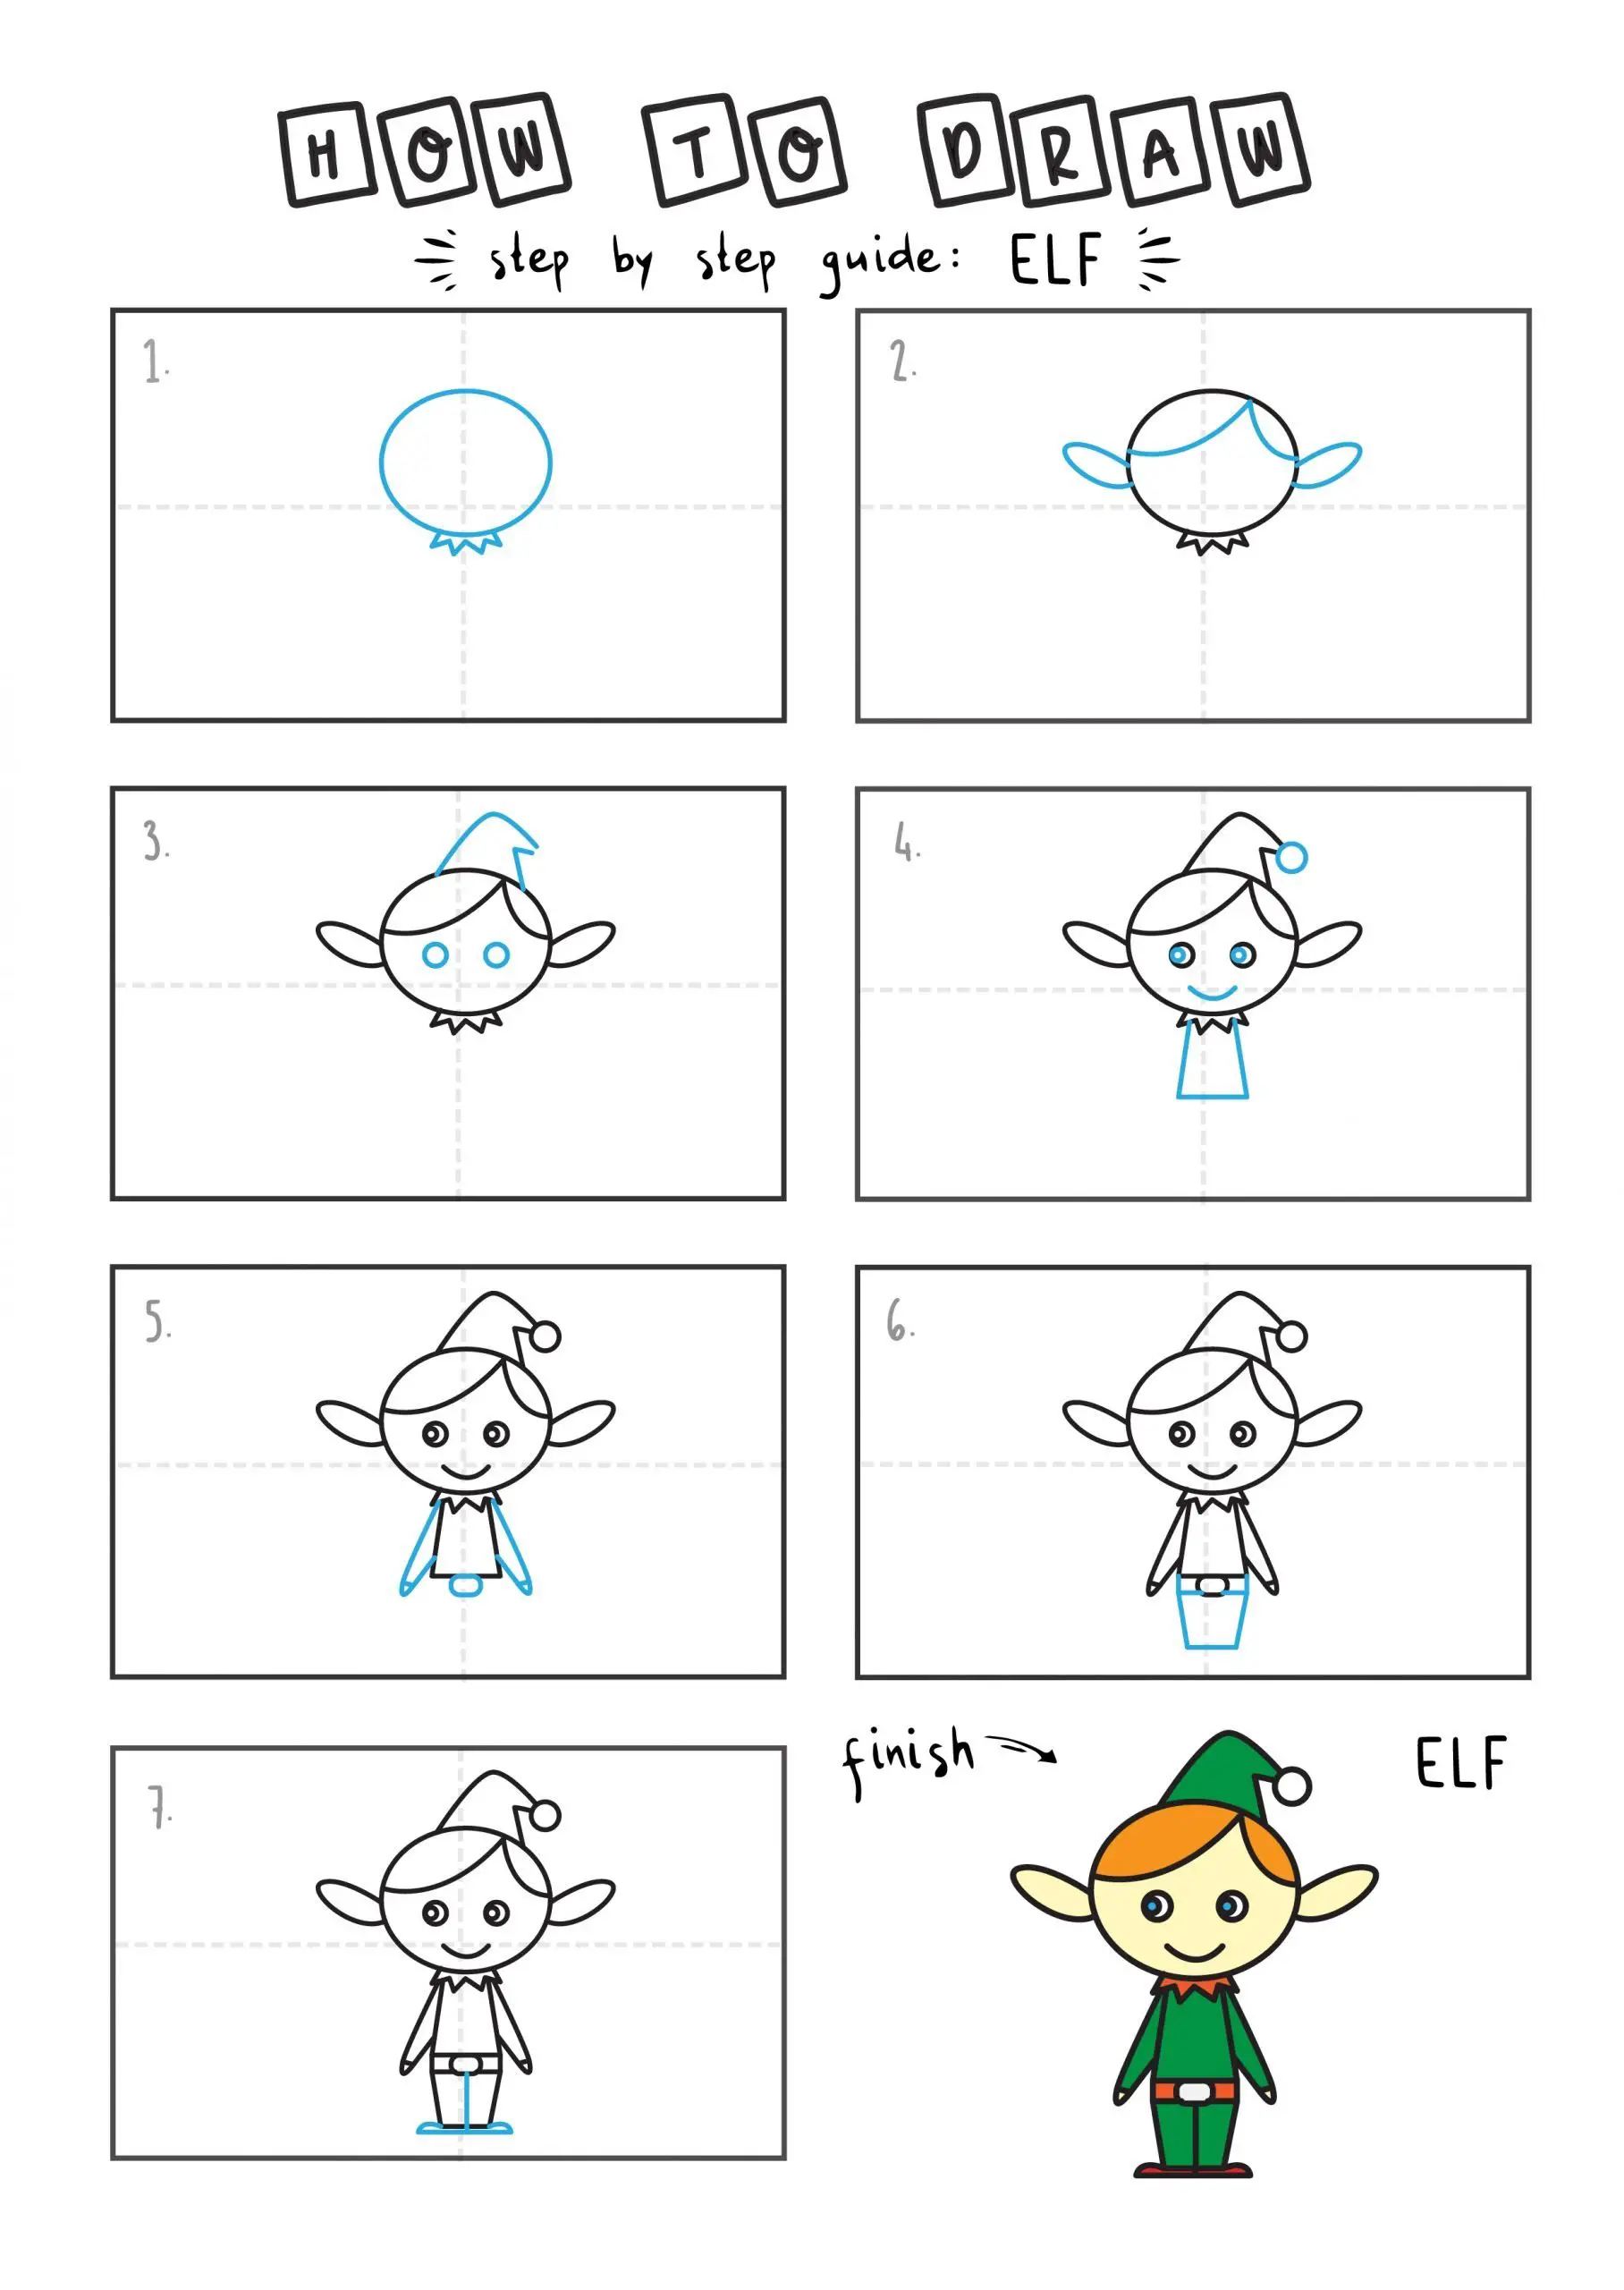 How To Draw Tutorials For Kids ELF ELVES XMAS CHRISTMAS HOLIDAY Step by step for kids easy simple guide